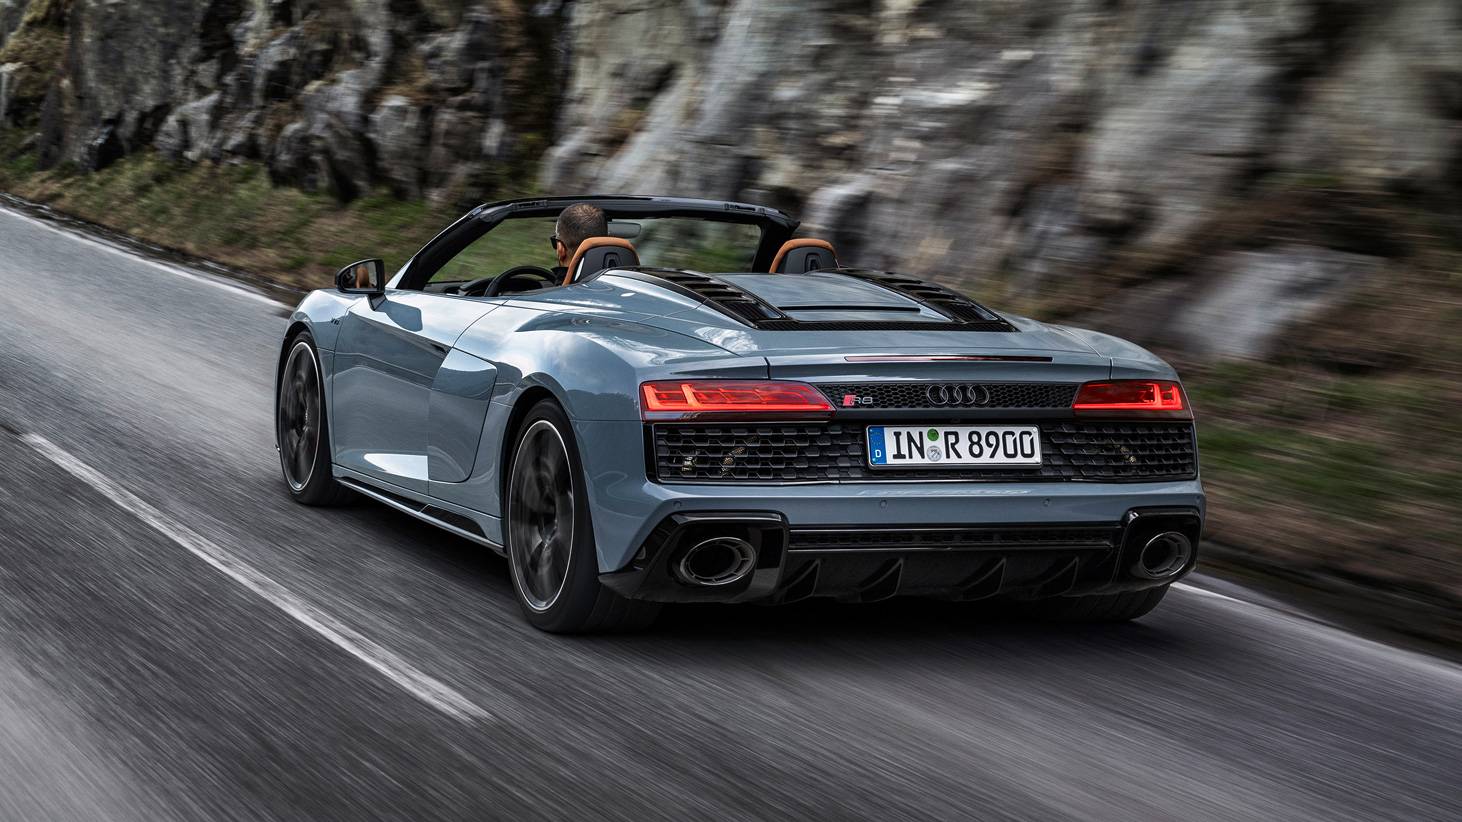 The Audi R8 V10 Spyder Performance Edition in blue/grey with black accents, on an open road.